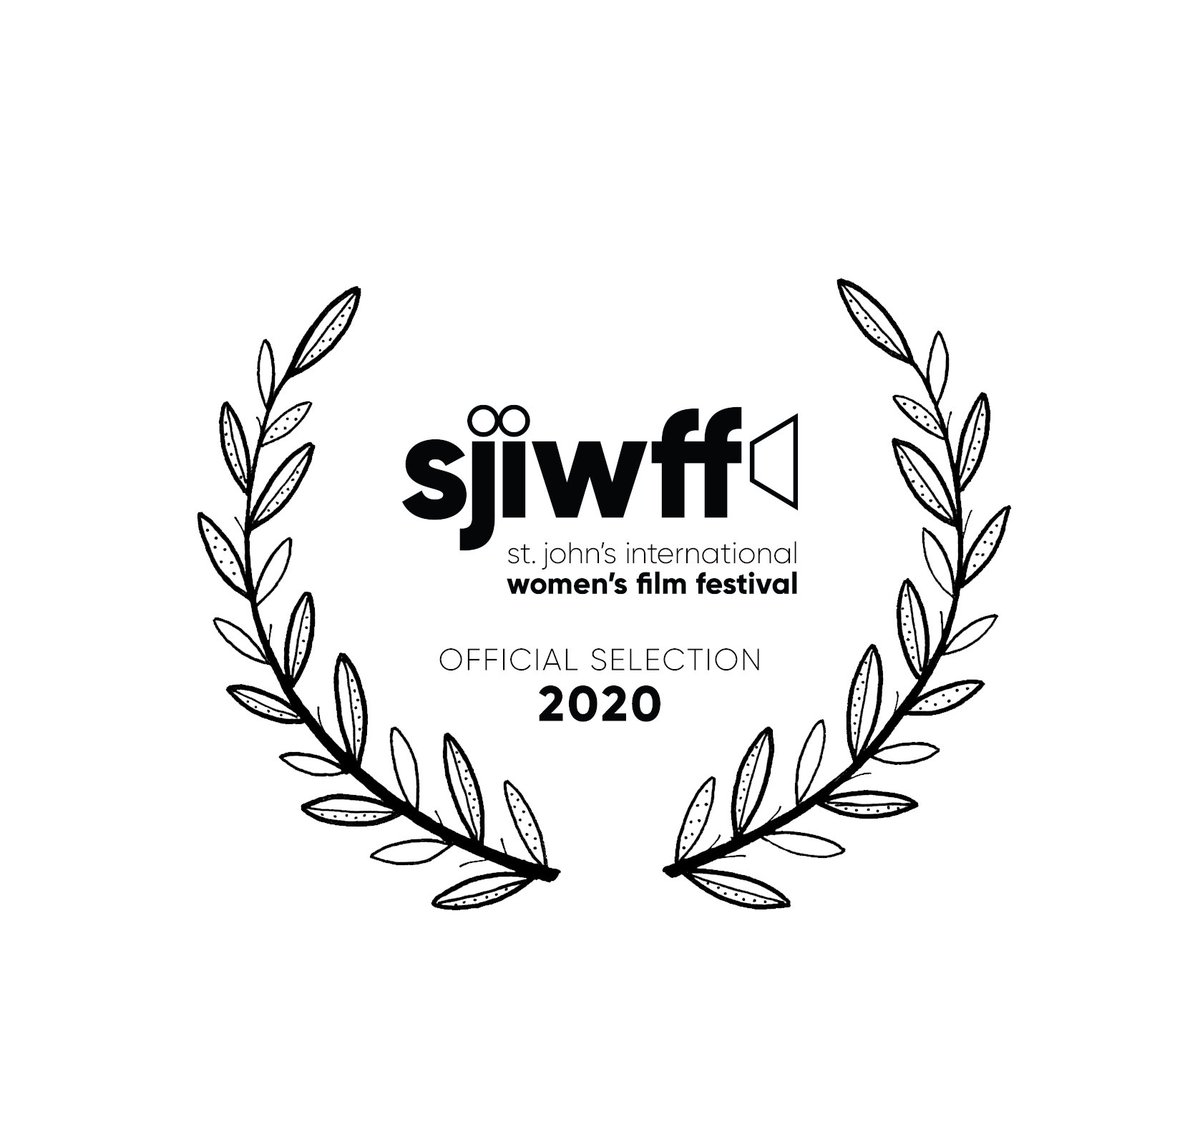 HUGE congrats to our over 90% female and/or female-identifying crew!  We will screen  at one of the longest running top female-focused film festivals in the world  @SJIWFF #newfoundland #canada #femalefilmmaker #shedirects #sag #short  #afromation